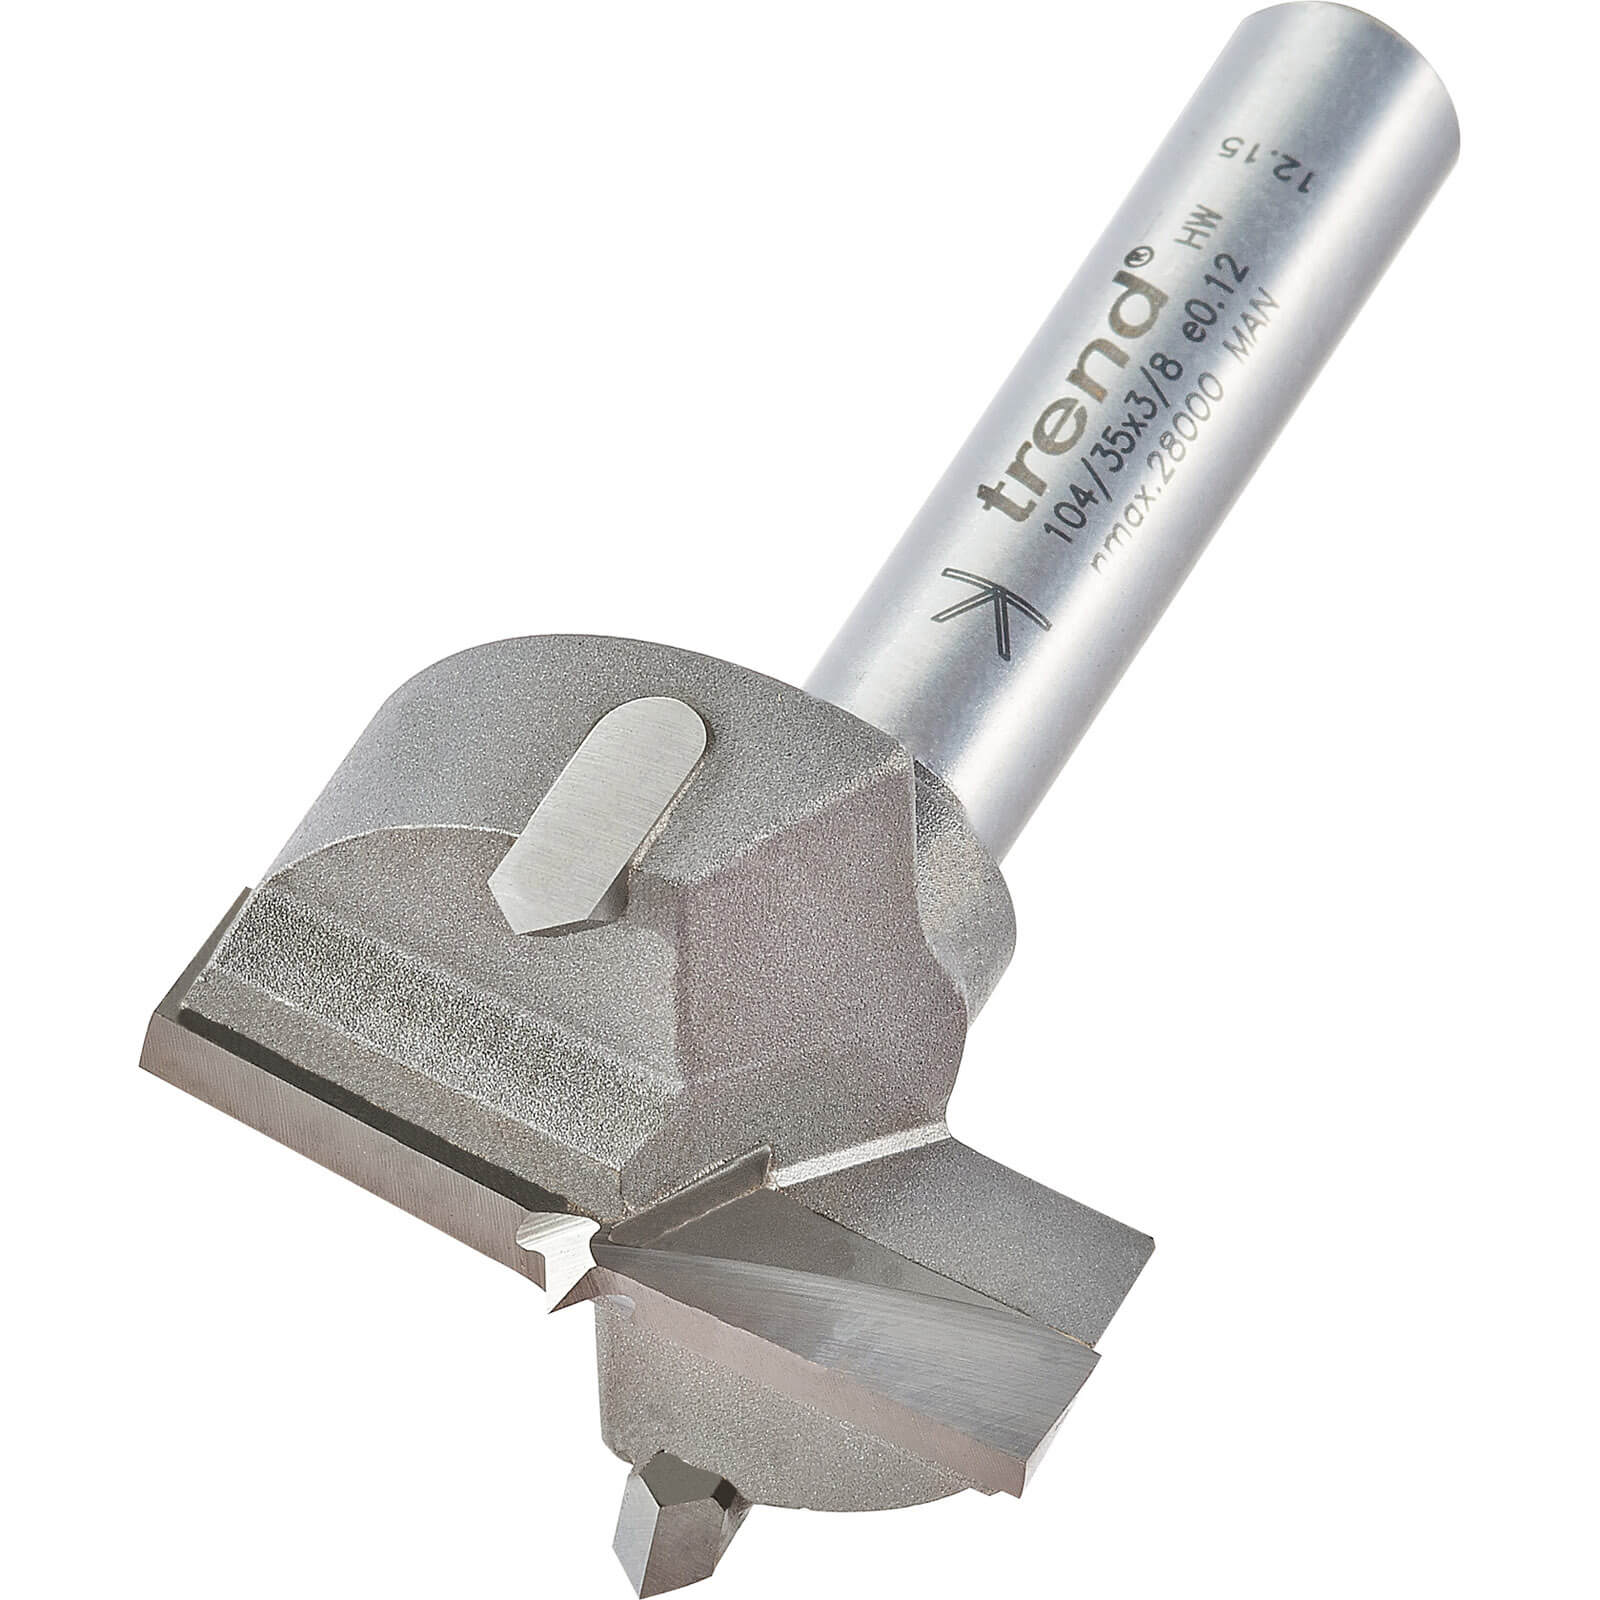 Image of Trend TCT Hinge Sinking Router Bit 35mm 3/8"